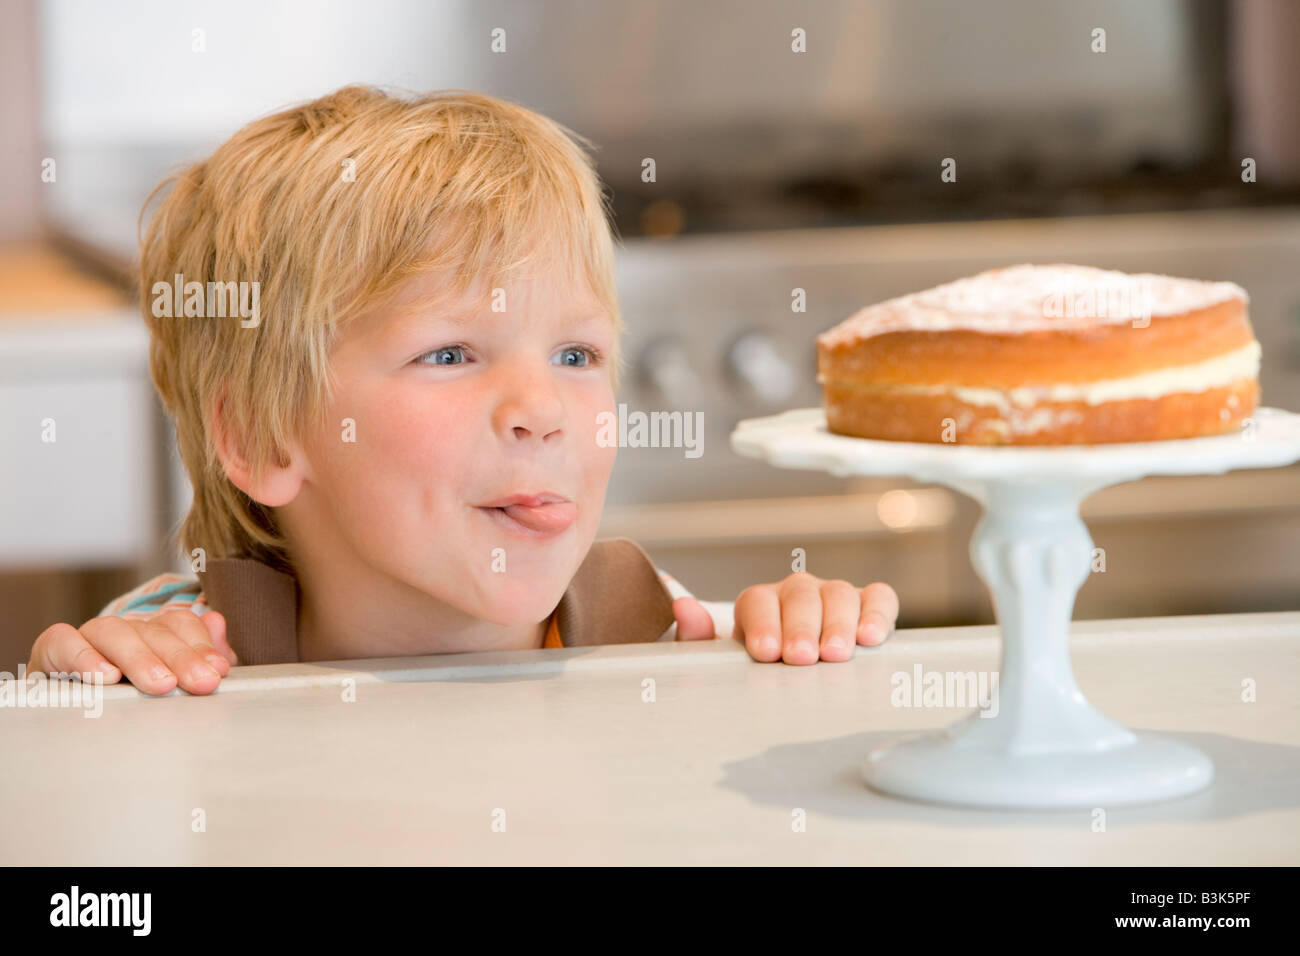 Young boy in kitchen looking at cake on counter Stock Photo